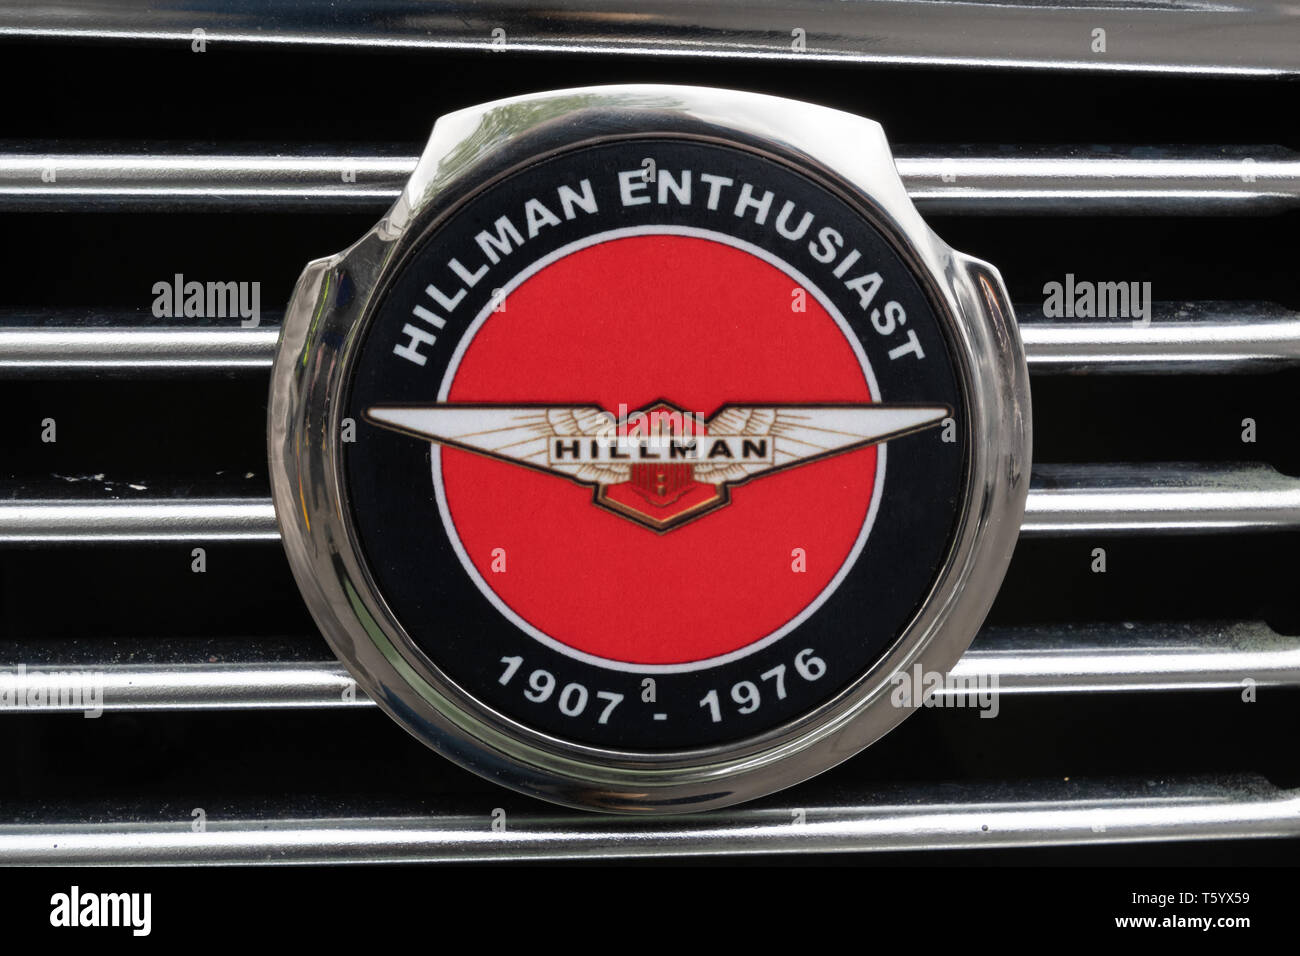 Hillman enthusiast badge on a car at a classic motor vehicle show in the UK. Note: you are buying a stock photograph of the car badge. Stock Photo